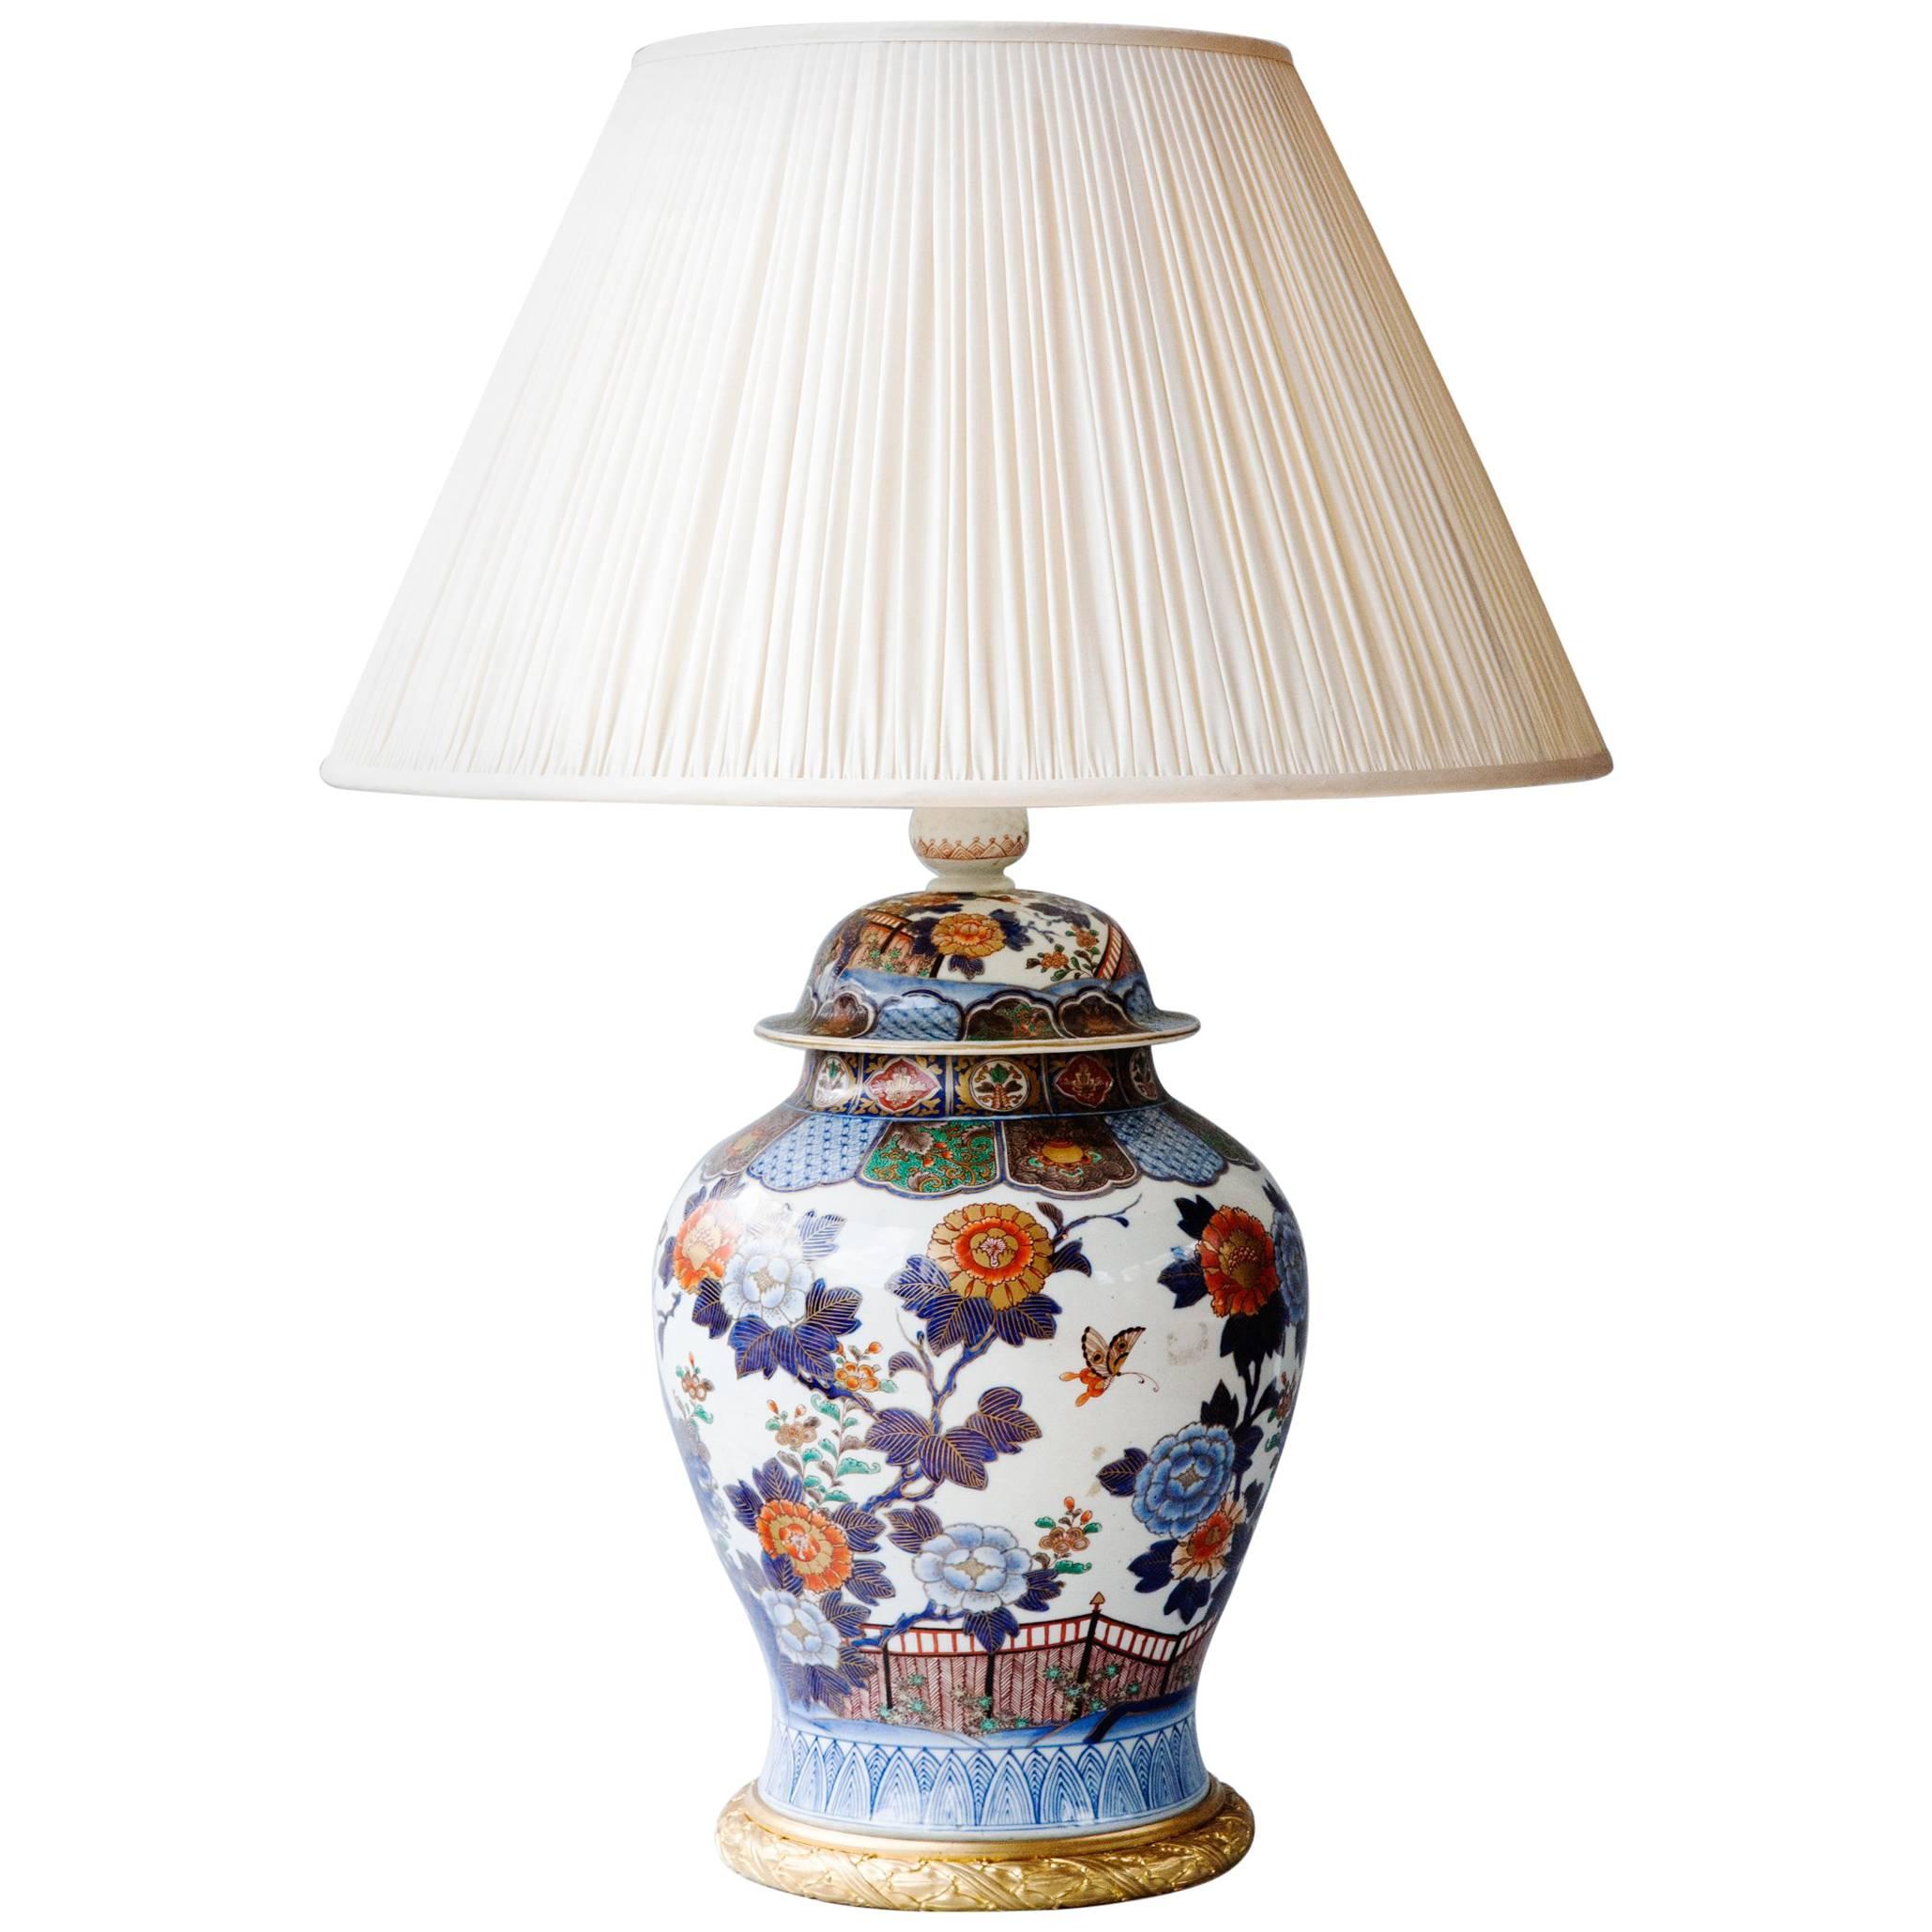 19th Century Meiji Porcelain Vase With Gilt Bronze Mounts Converted to a Lamp For Sale